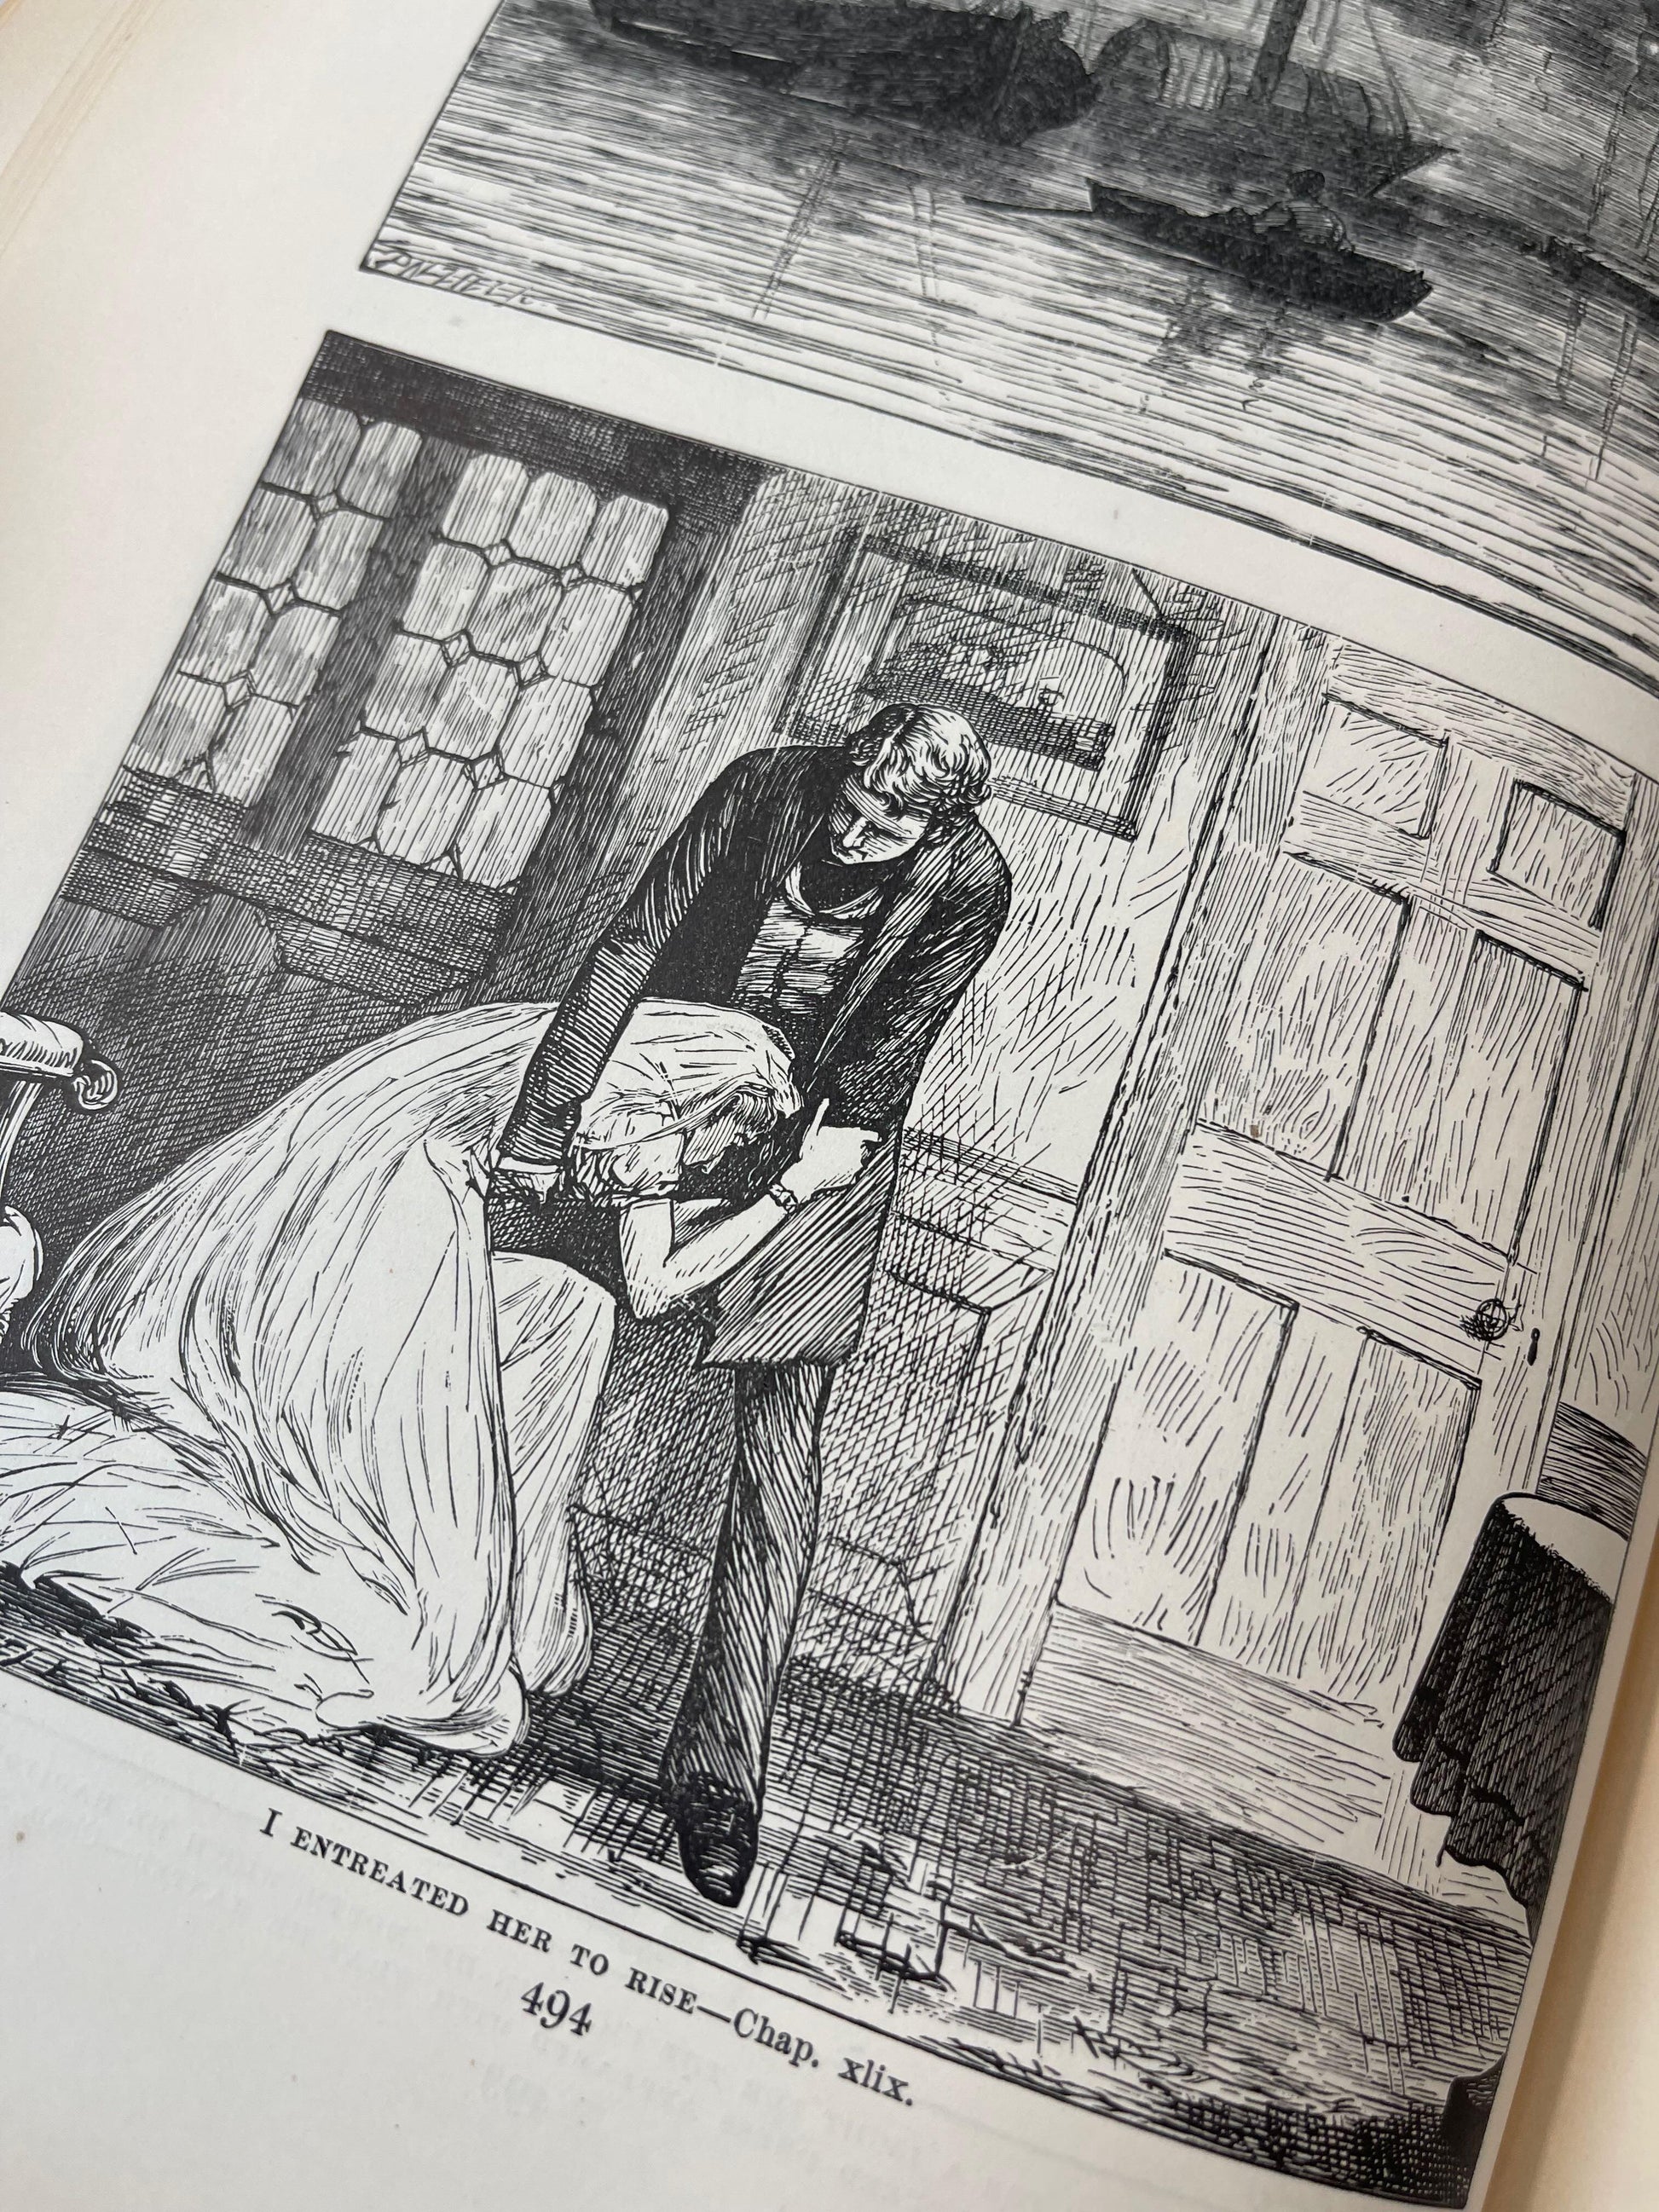 Scenes And Characters from The Works Of Charles Dickens / 1st Edition / MCMVIII (1908) - Precious Cache